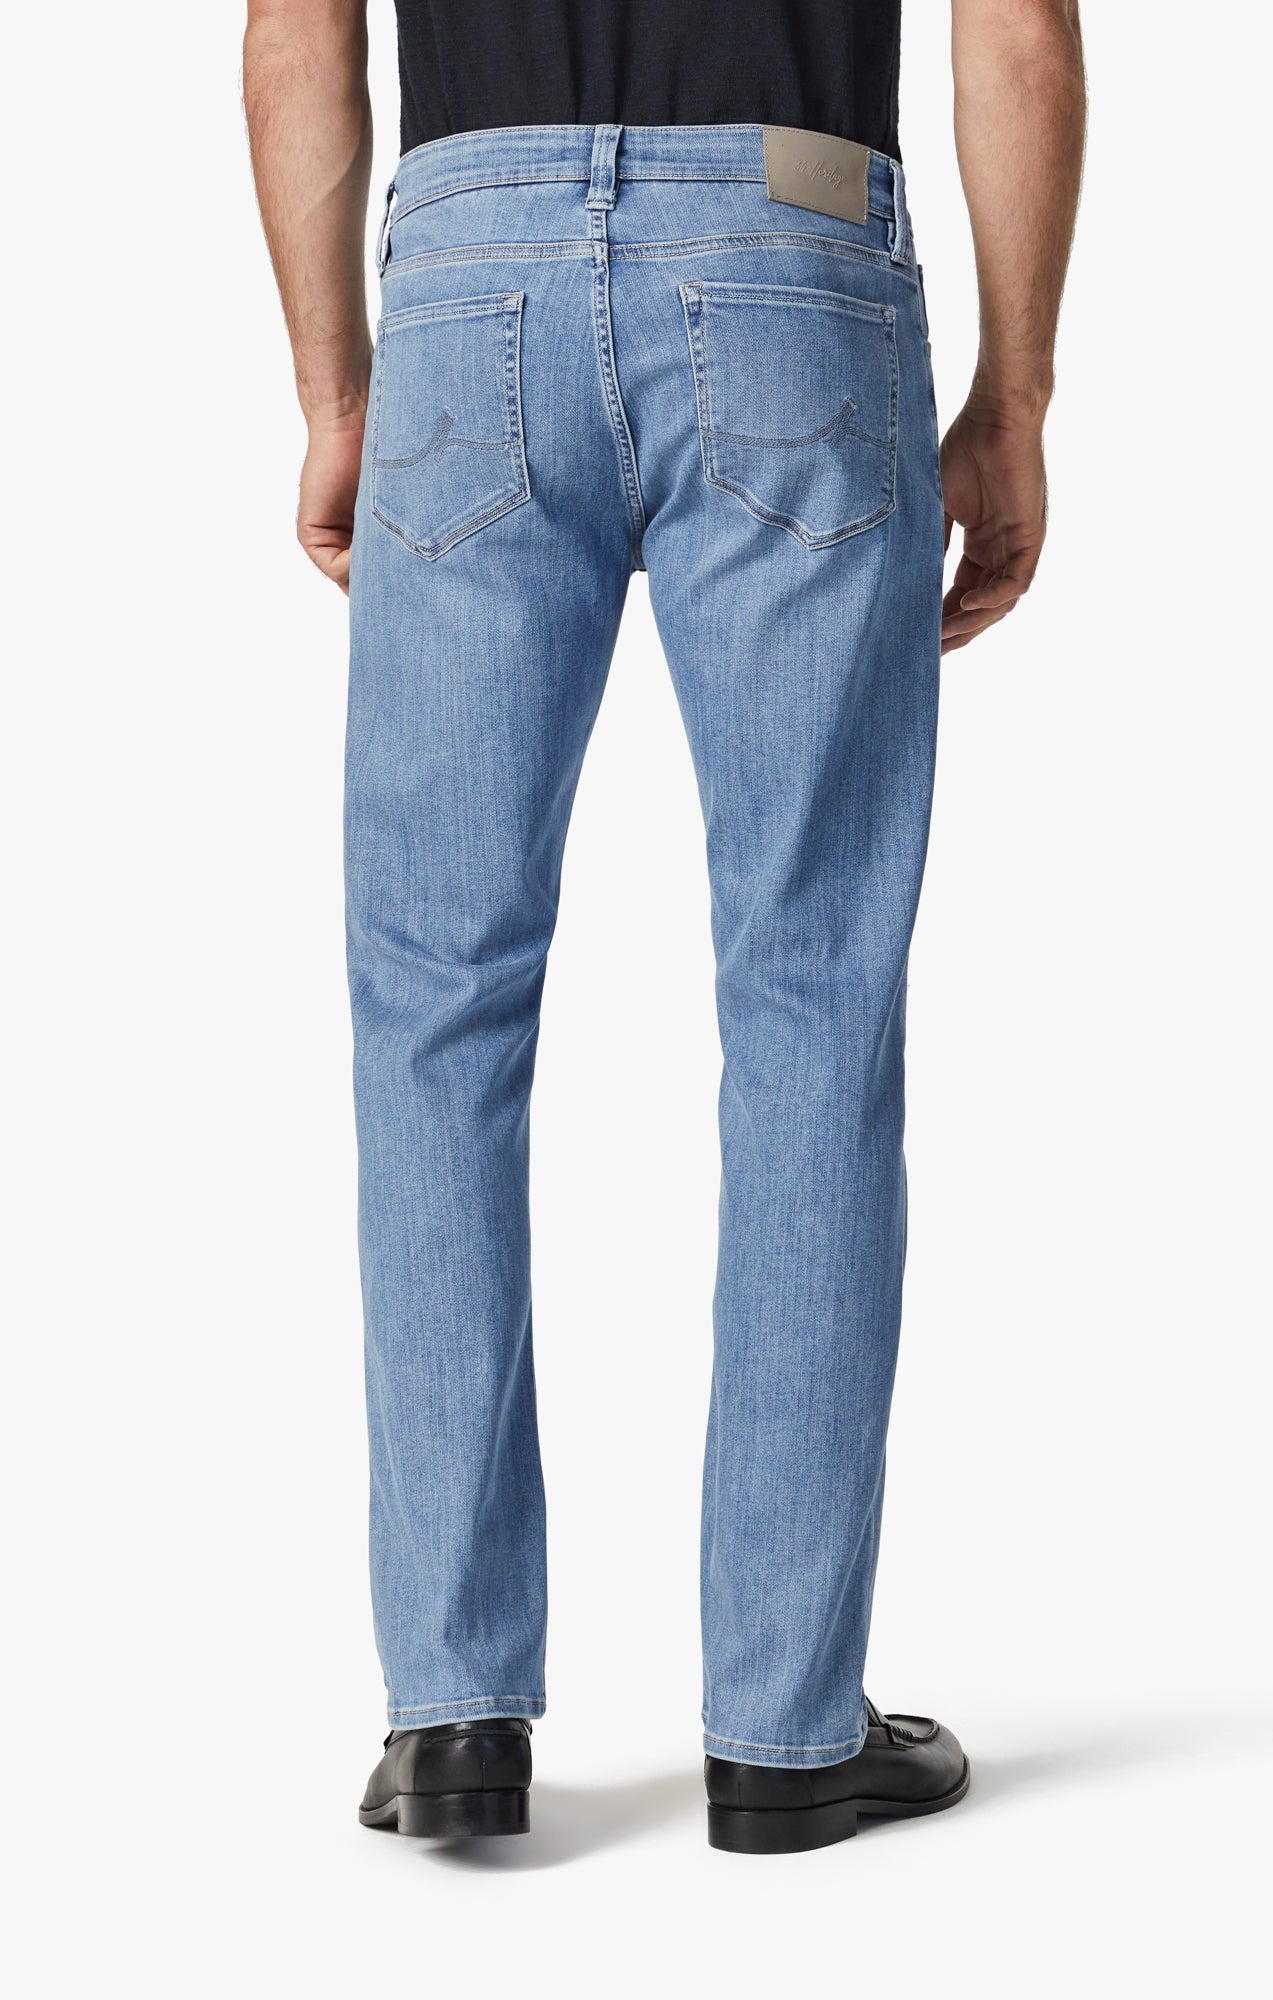 Charisma Relaxed Straight Jeans In Light Brushed Urban – 34 Heritage